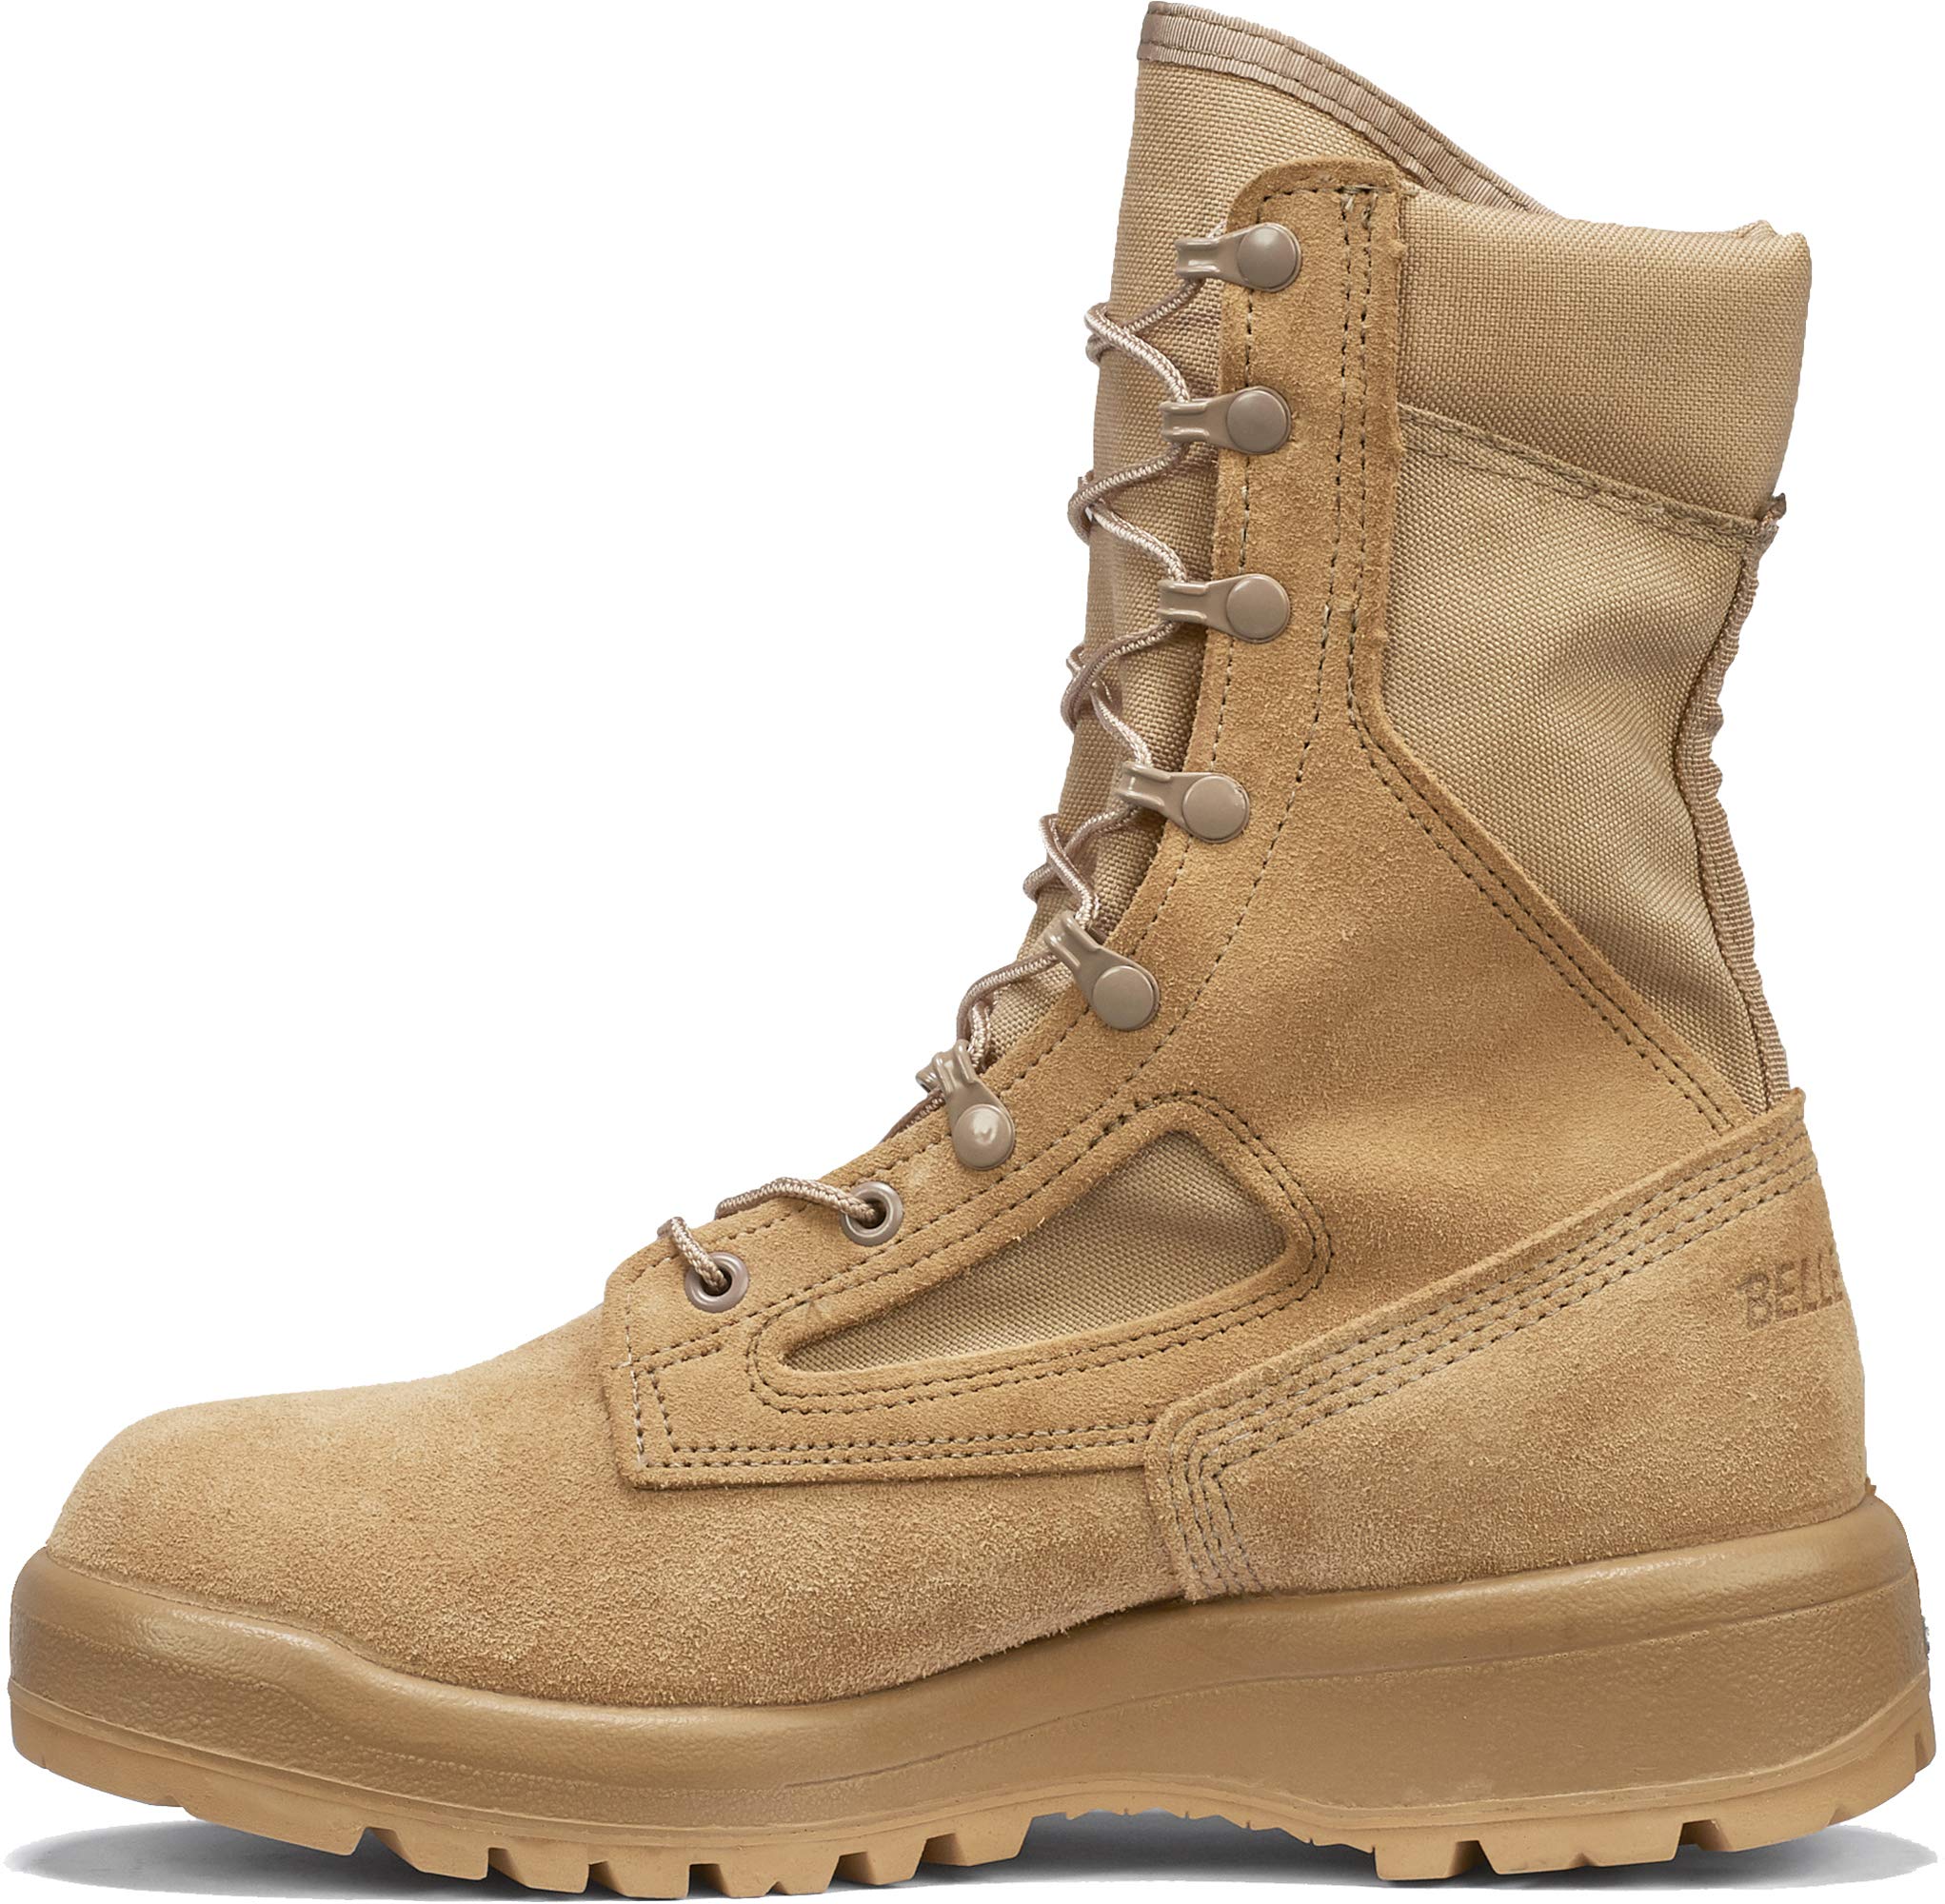 Belleville 390DES 8 Inch Hot Weather Combat Boot - AR 670-1 Compliant Desert Tan Cattlehide Leather Army Boots for Men with Vibram Sierra Outsole and Vanguard Premium Cushioning